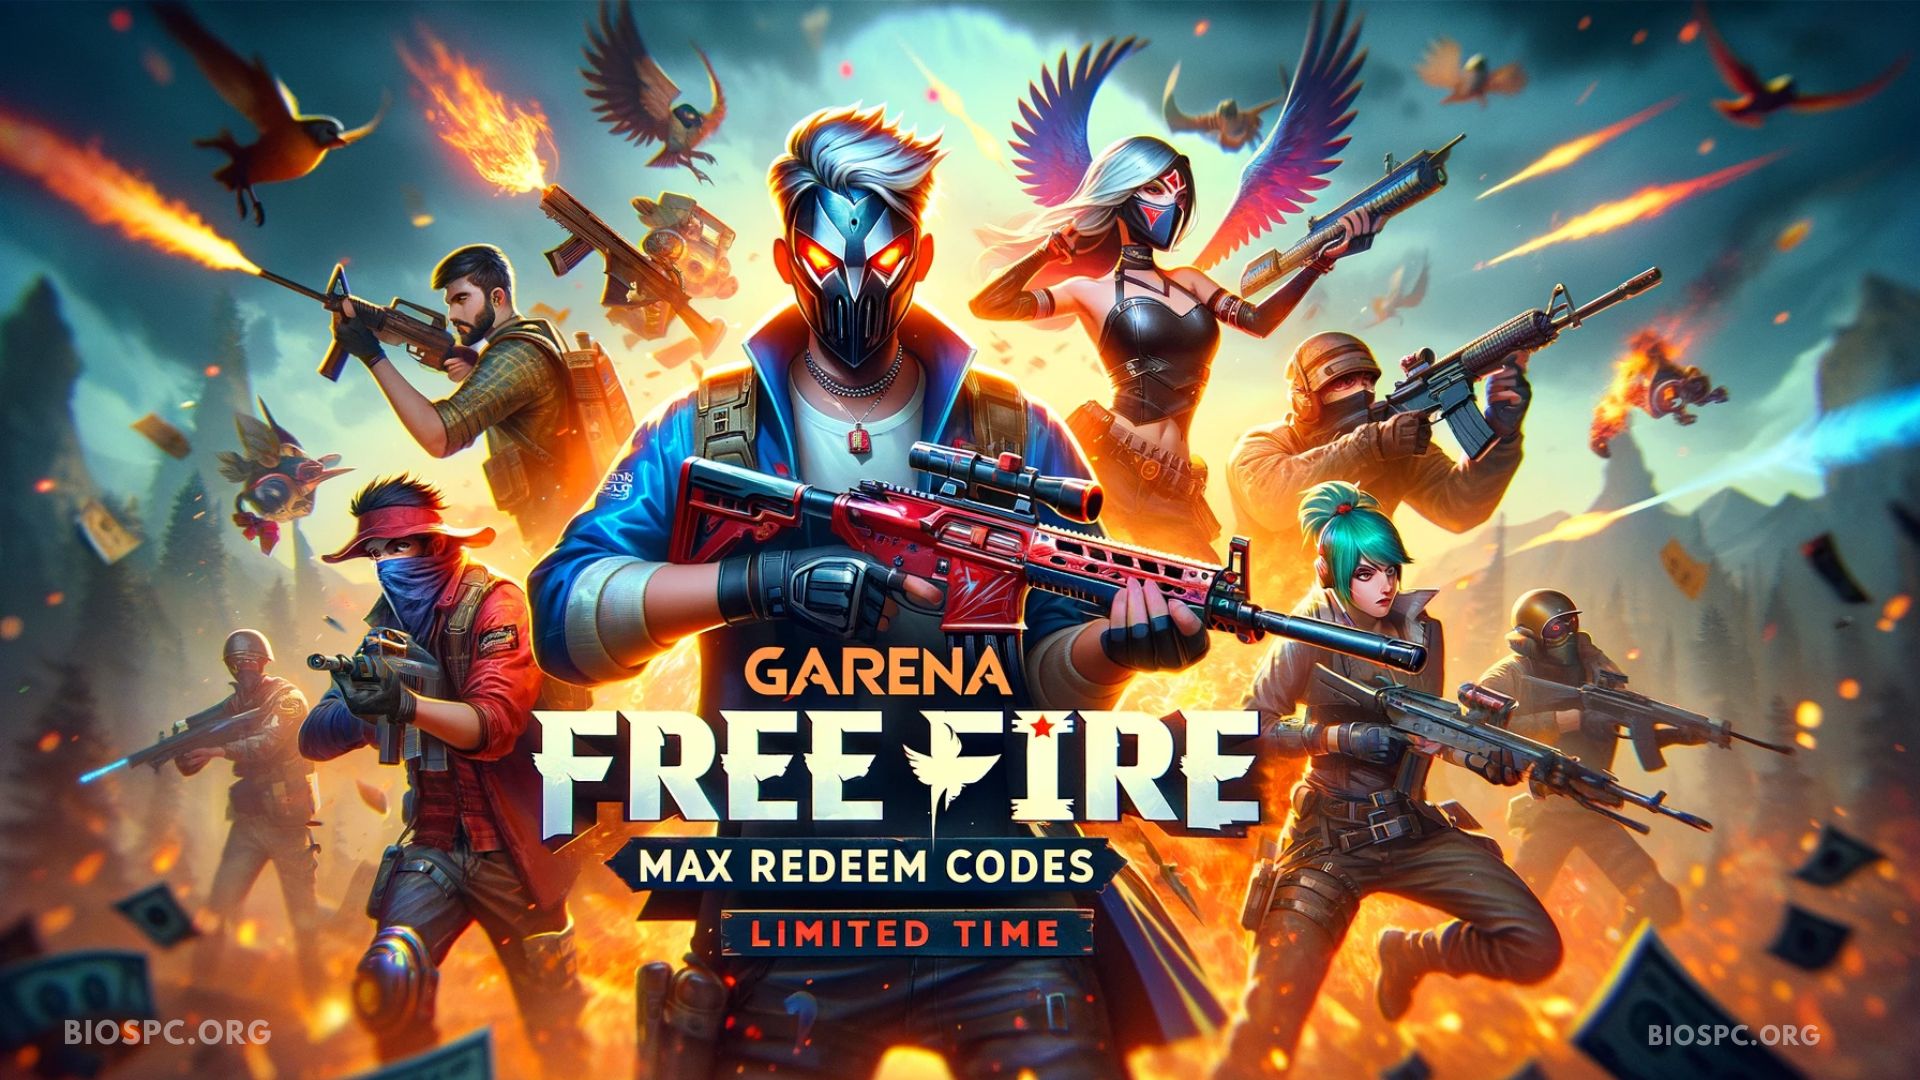 Garena Free Fire redeem codes for August 3: Check redeem codes and